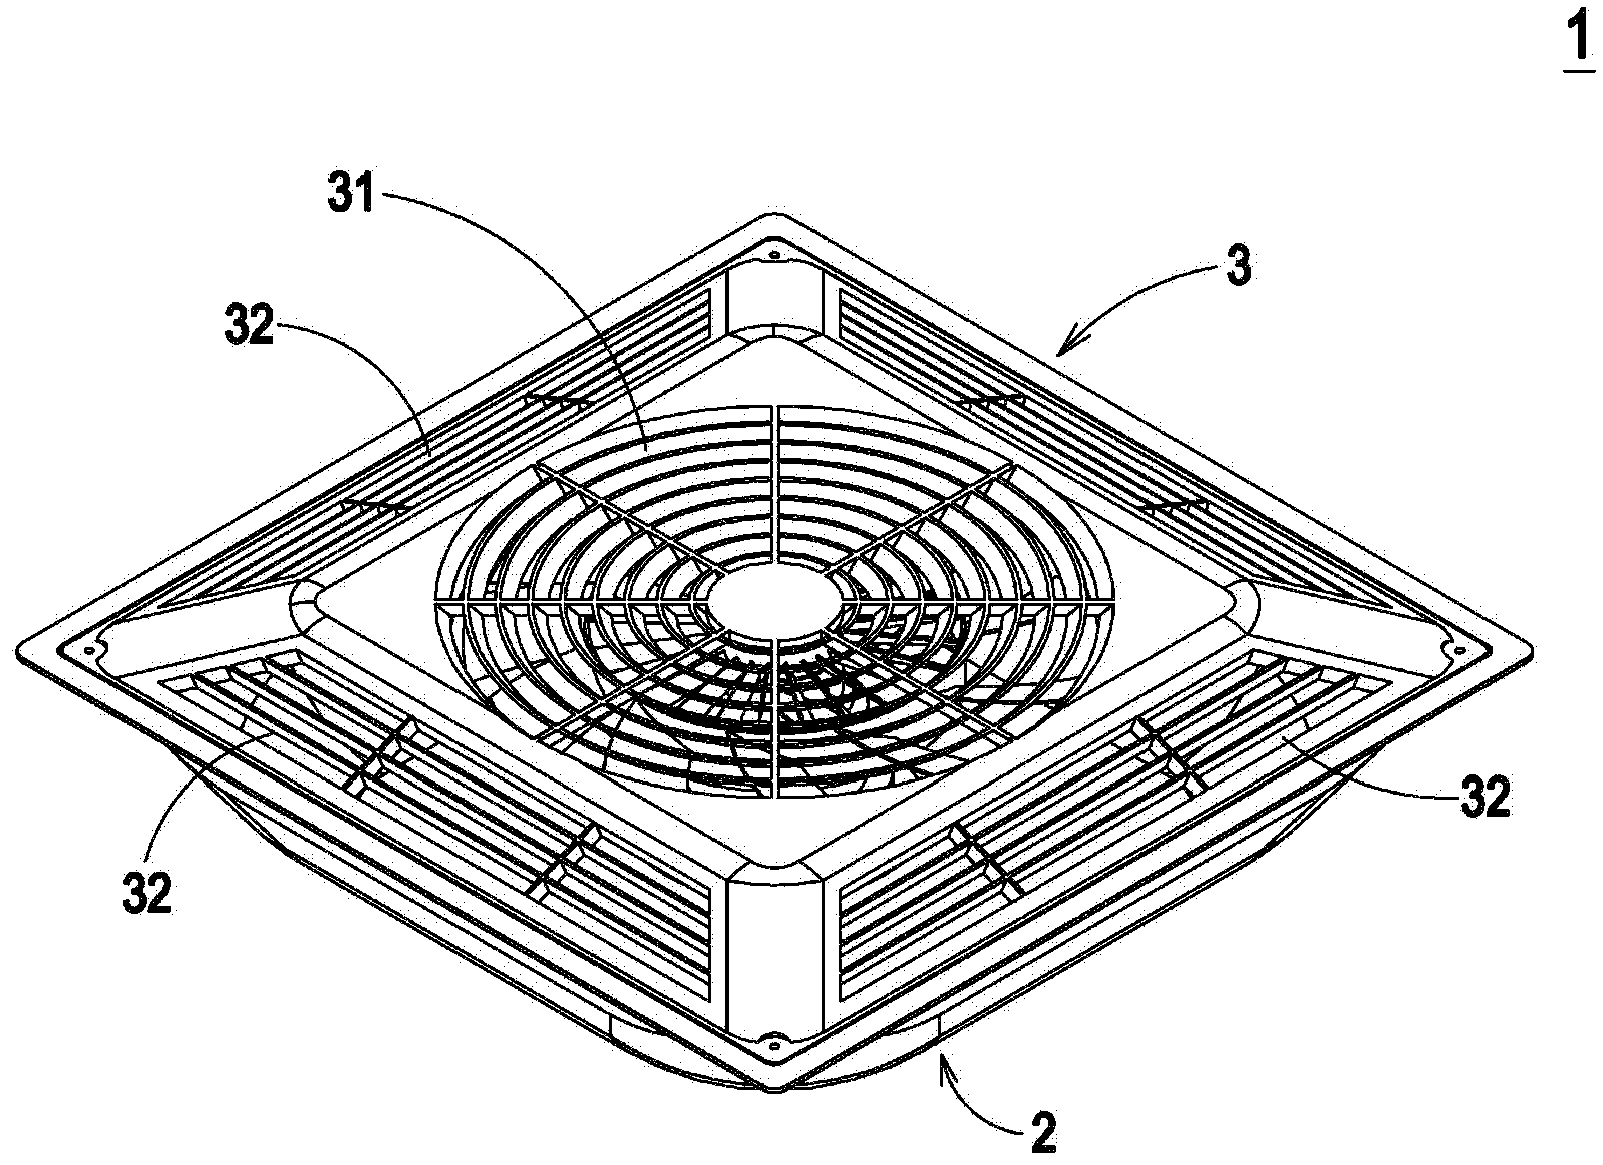 Circulating fan and fan blade group thereof